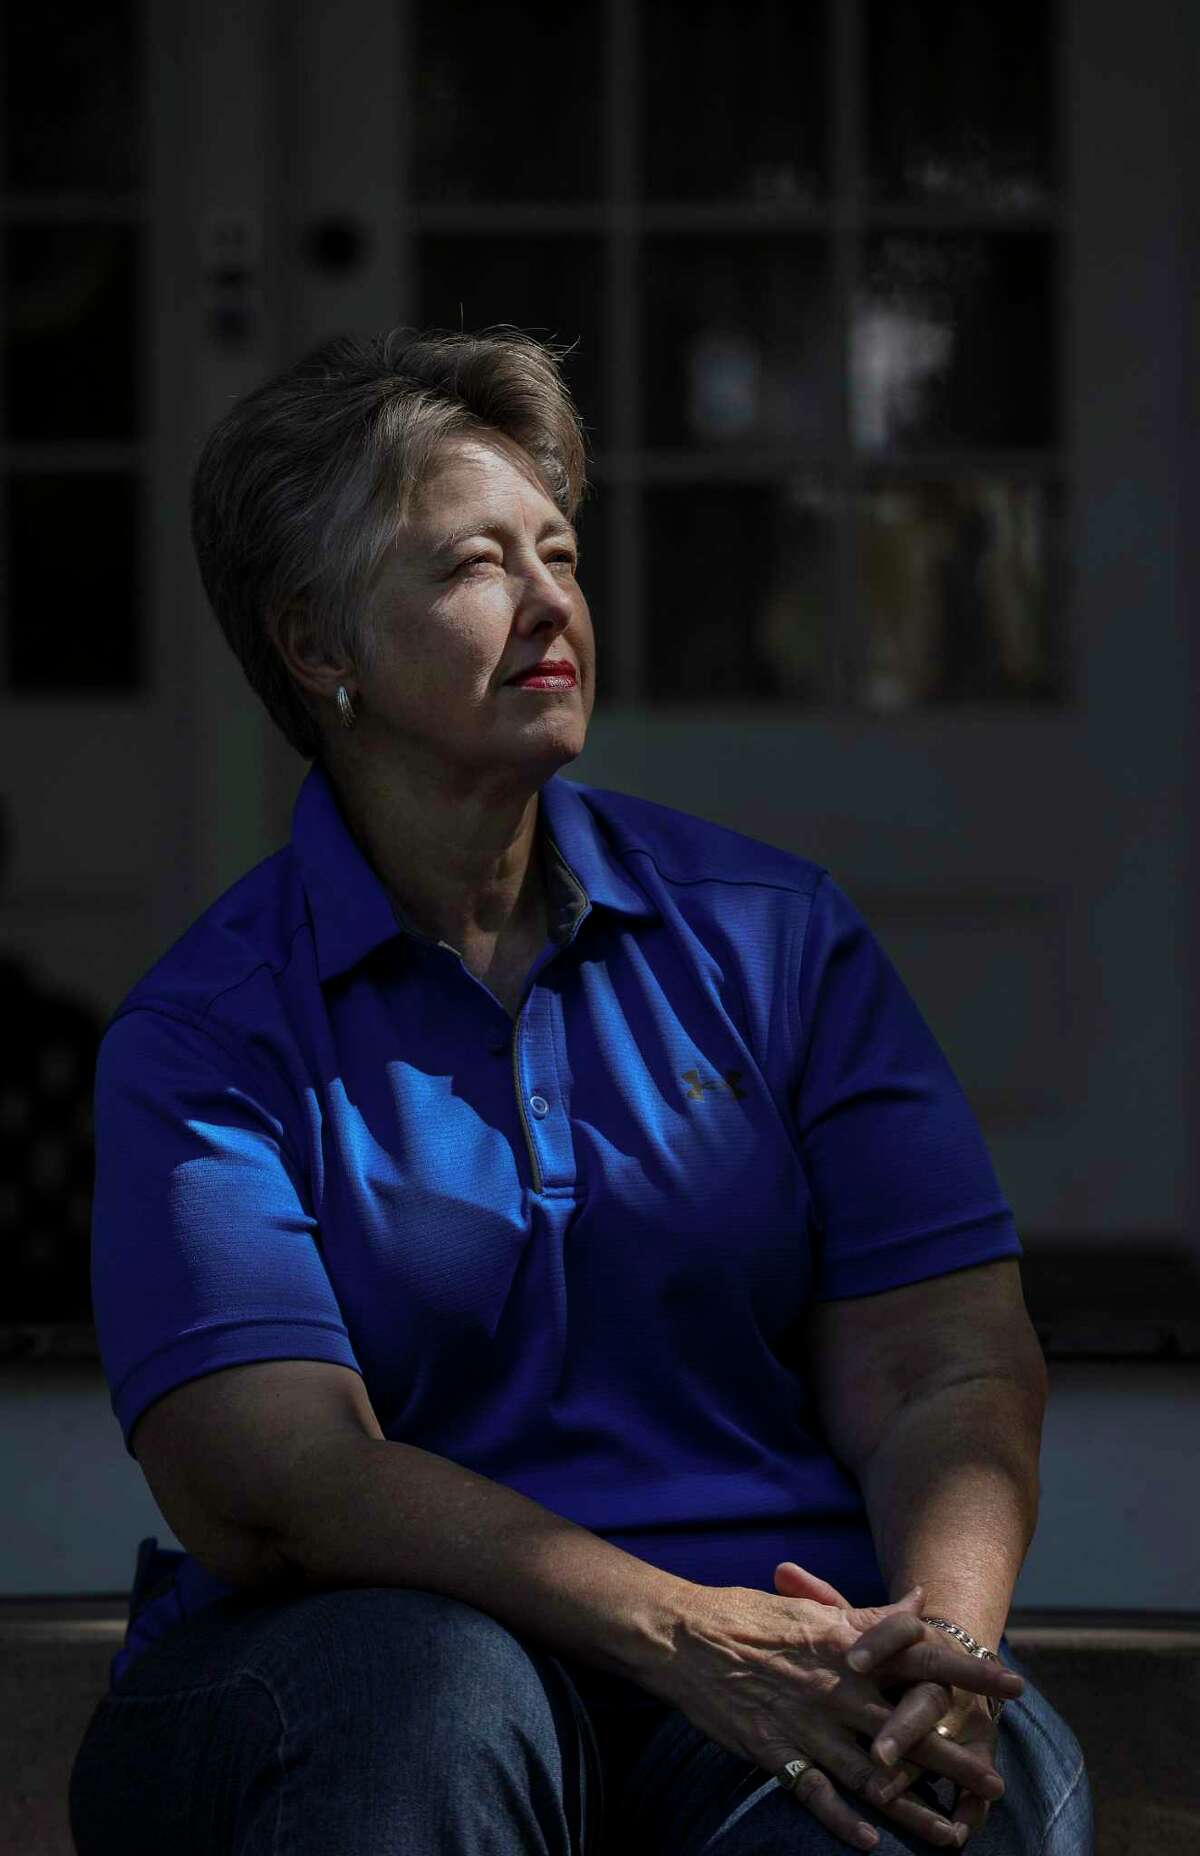 "You have the law on your side, but it's only as good as the people who enforce it, and we still don't completely have the law on our side," said Annise Parker, former Houston mayor, as she posed for a portrait Monday, June 15, 2020, in Houston. Parker said she thought the Supreme Court ruling today didn't go far enough to protect the rights of LGBTQ people, because it only protects them from workplace discrimination. Parker tried to pass the Houston Equal Rights Ordinance, called HERO, while mayor in 2015. The ordinance would have banned discrimination based not just on gender identity and sexual orientation, but also 13 classes already protected under federal law: sex, race, color, ethnicity, national origin, age, religion, disability, pregnancy and genetic information, as well as family, marital or military status. Voters rejected the ordinance.